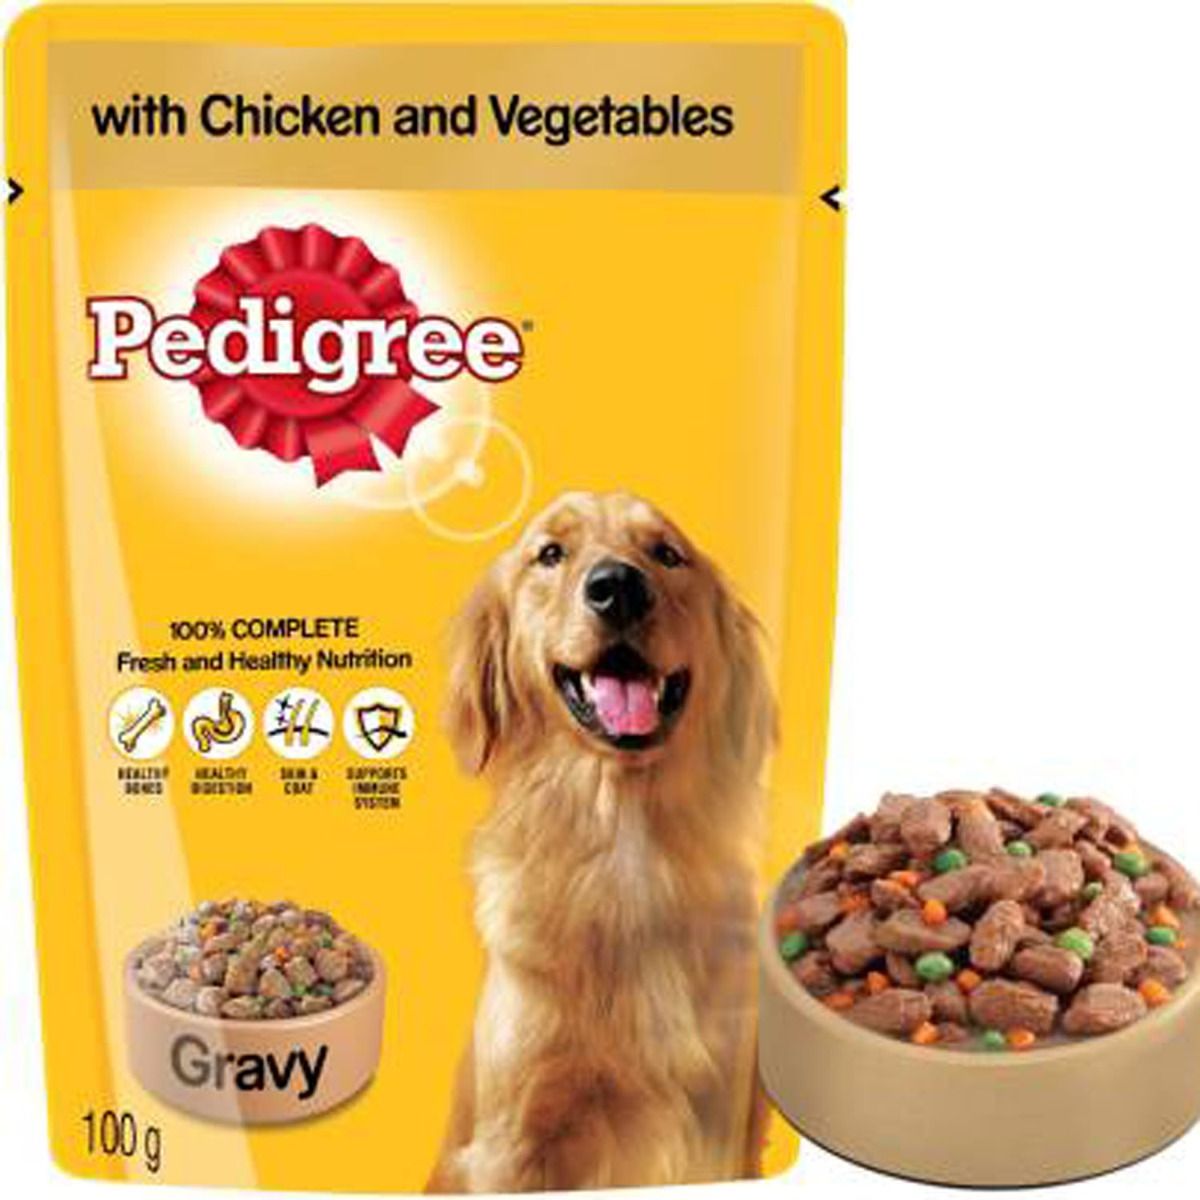 Pedigree Adult Dog Food With Chicken & Vegetables, 100 gm, Pack of 1 